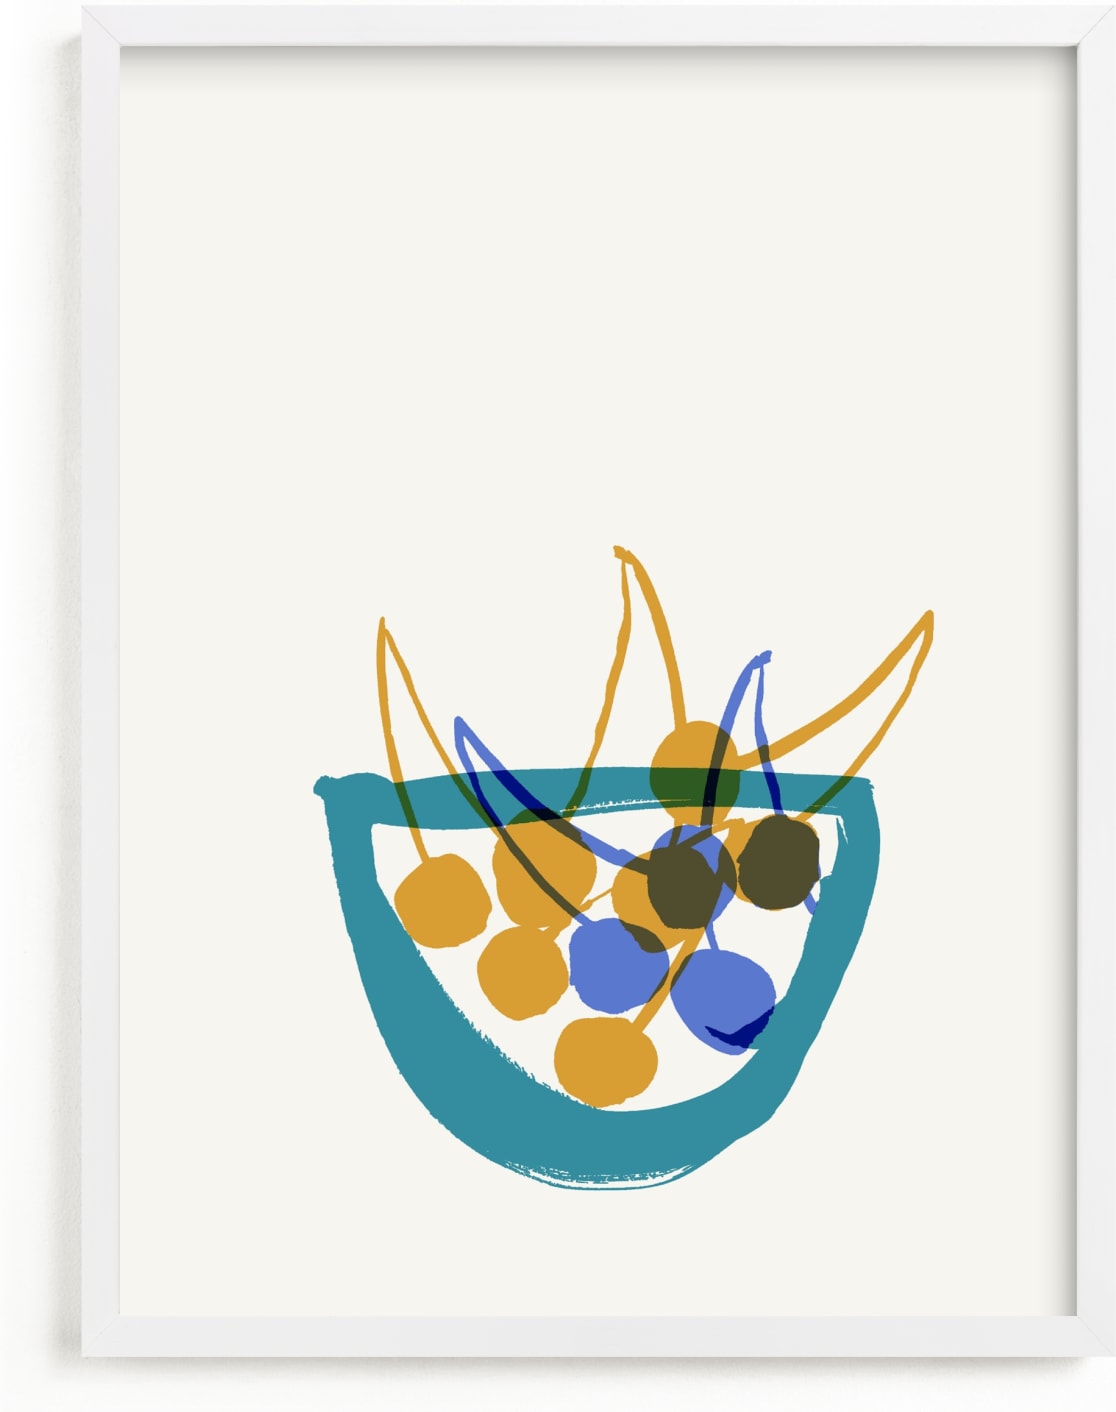 This is a blue art by Sonya Percival called Life is a bowl of cherries.